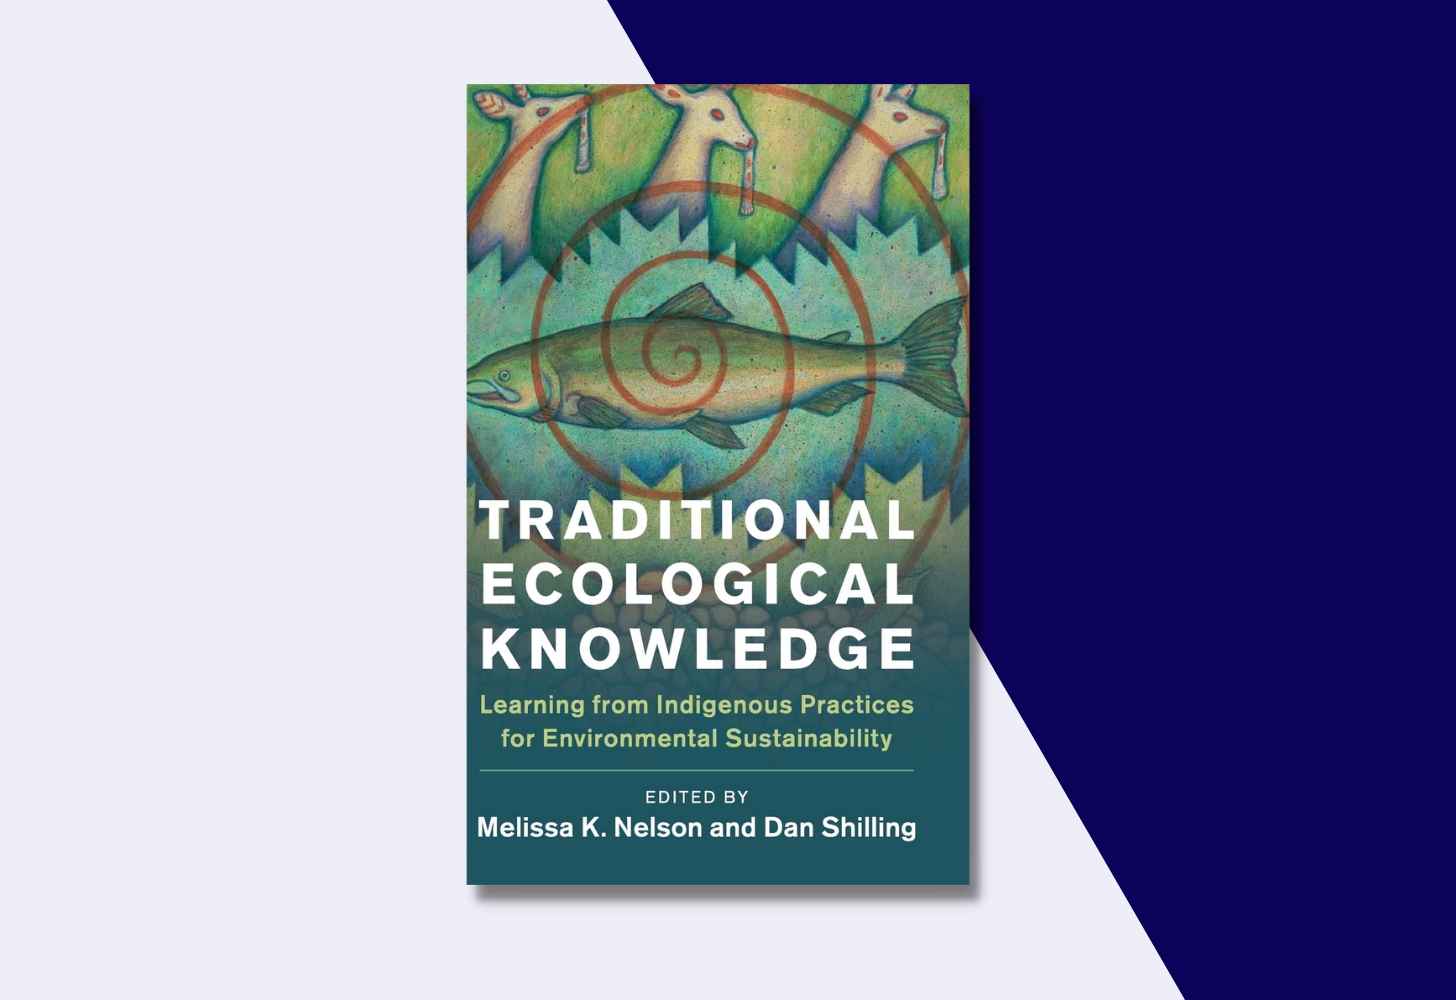 The Cover Of “Traditional Ecological Knowledge: Learning from Indigenous Practices for Environmental Sustainability” edited by Melissa K. Nelson and Dan Shilling